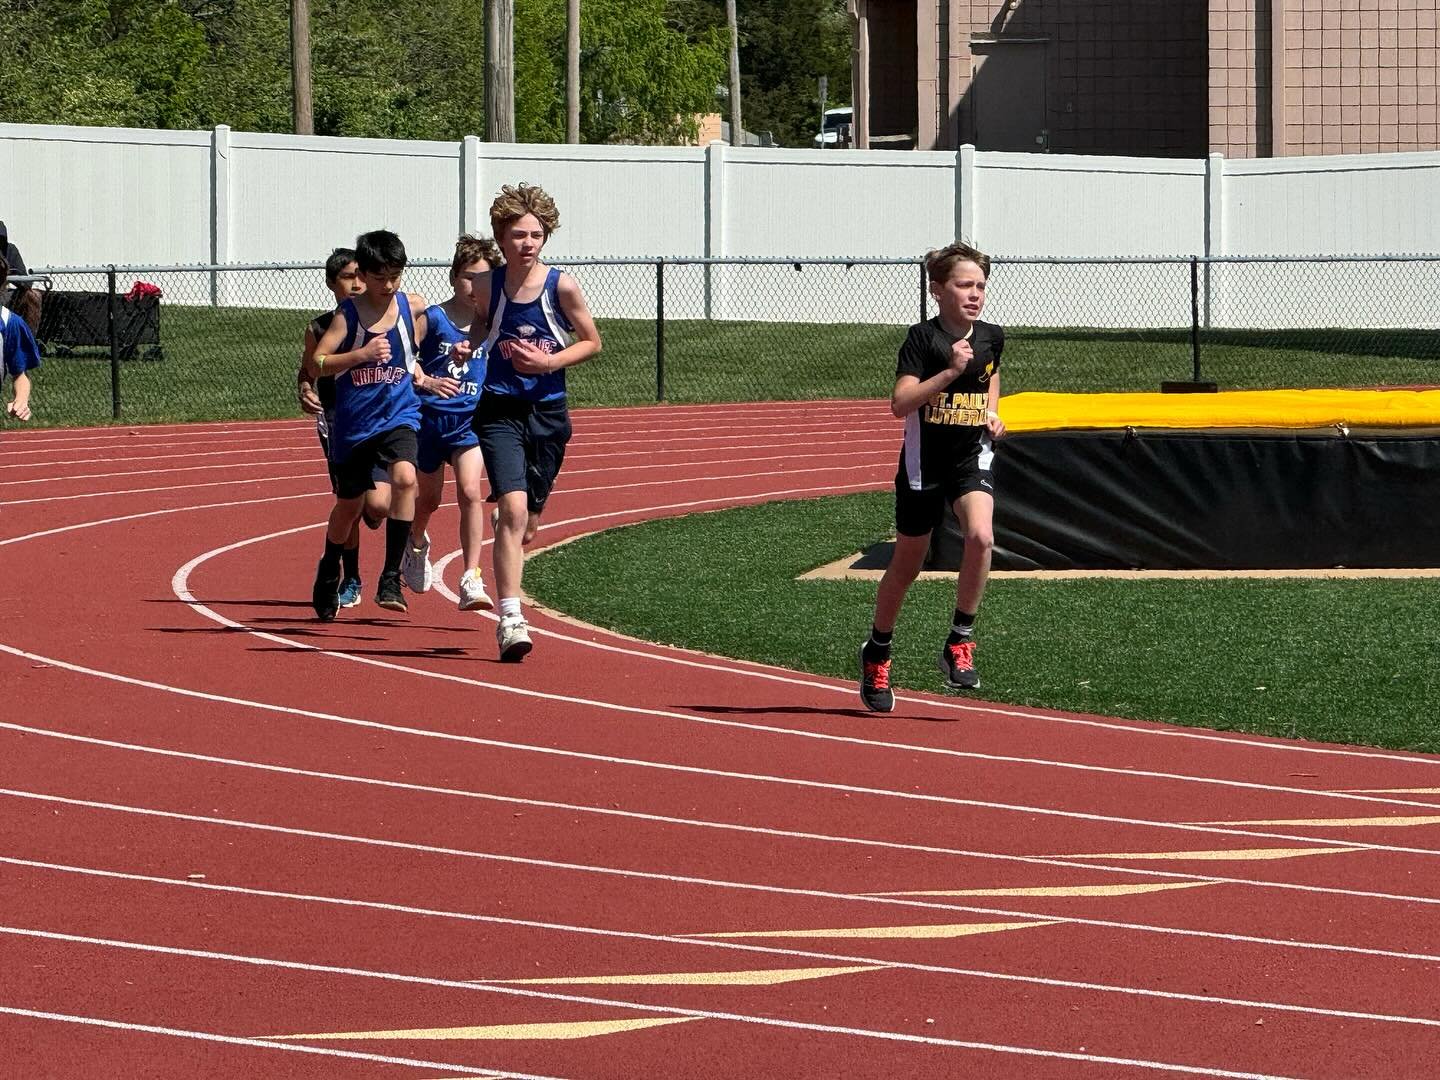 Our SPLS Saints track and field athletes were back in action again today at the Chargers Invitational at Lutheran South! Many of them earned new personal records too!  Way to go, Saints! 
A special congratulations to our 1st place finishers: Earl in 